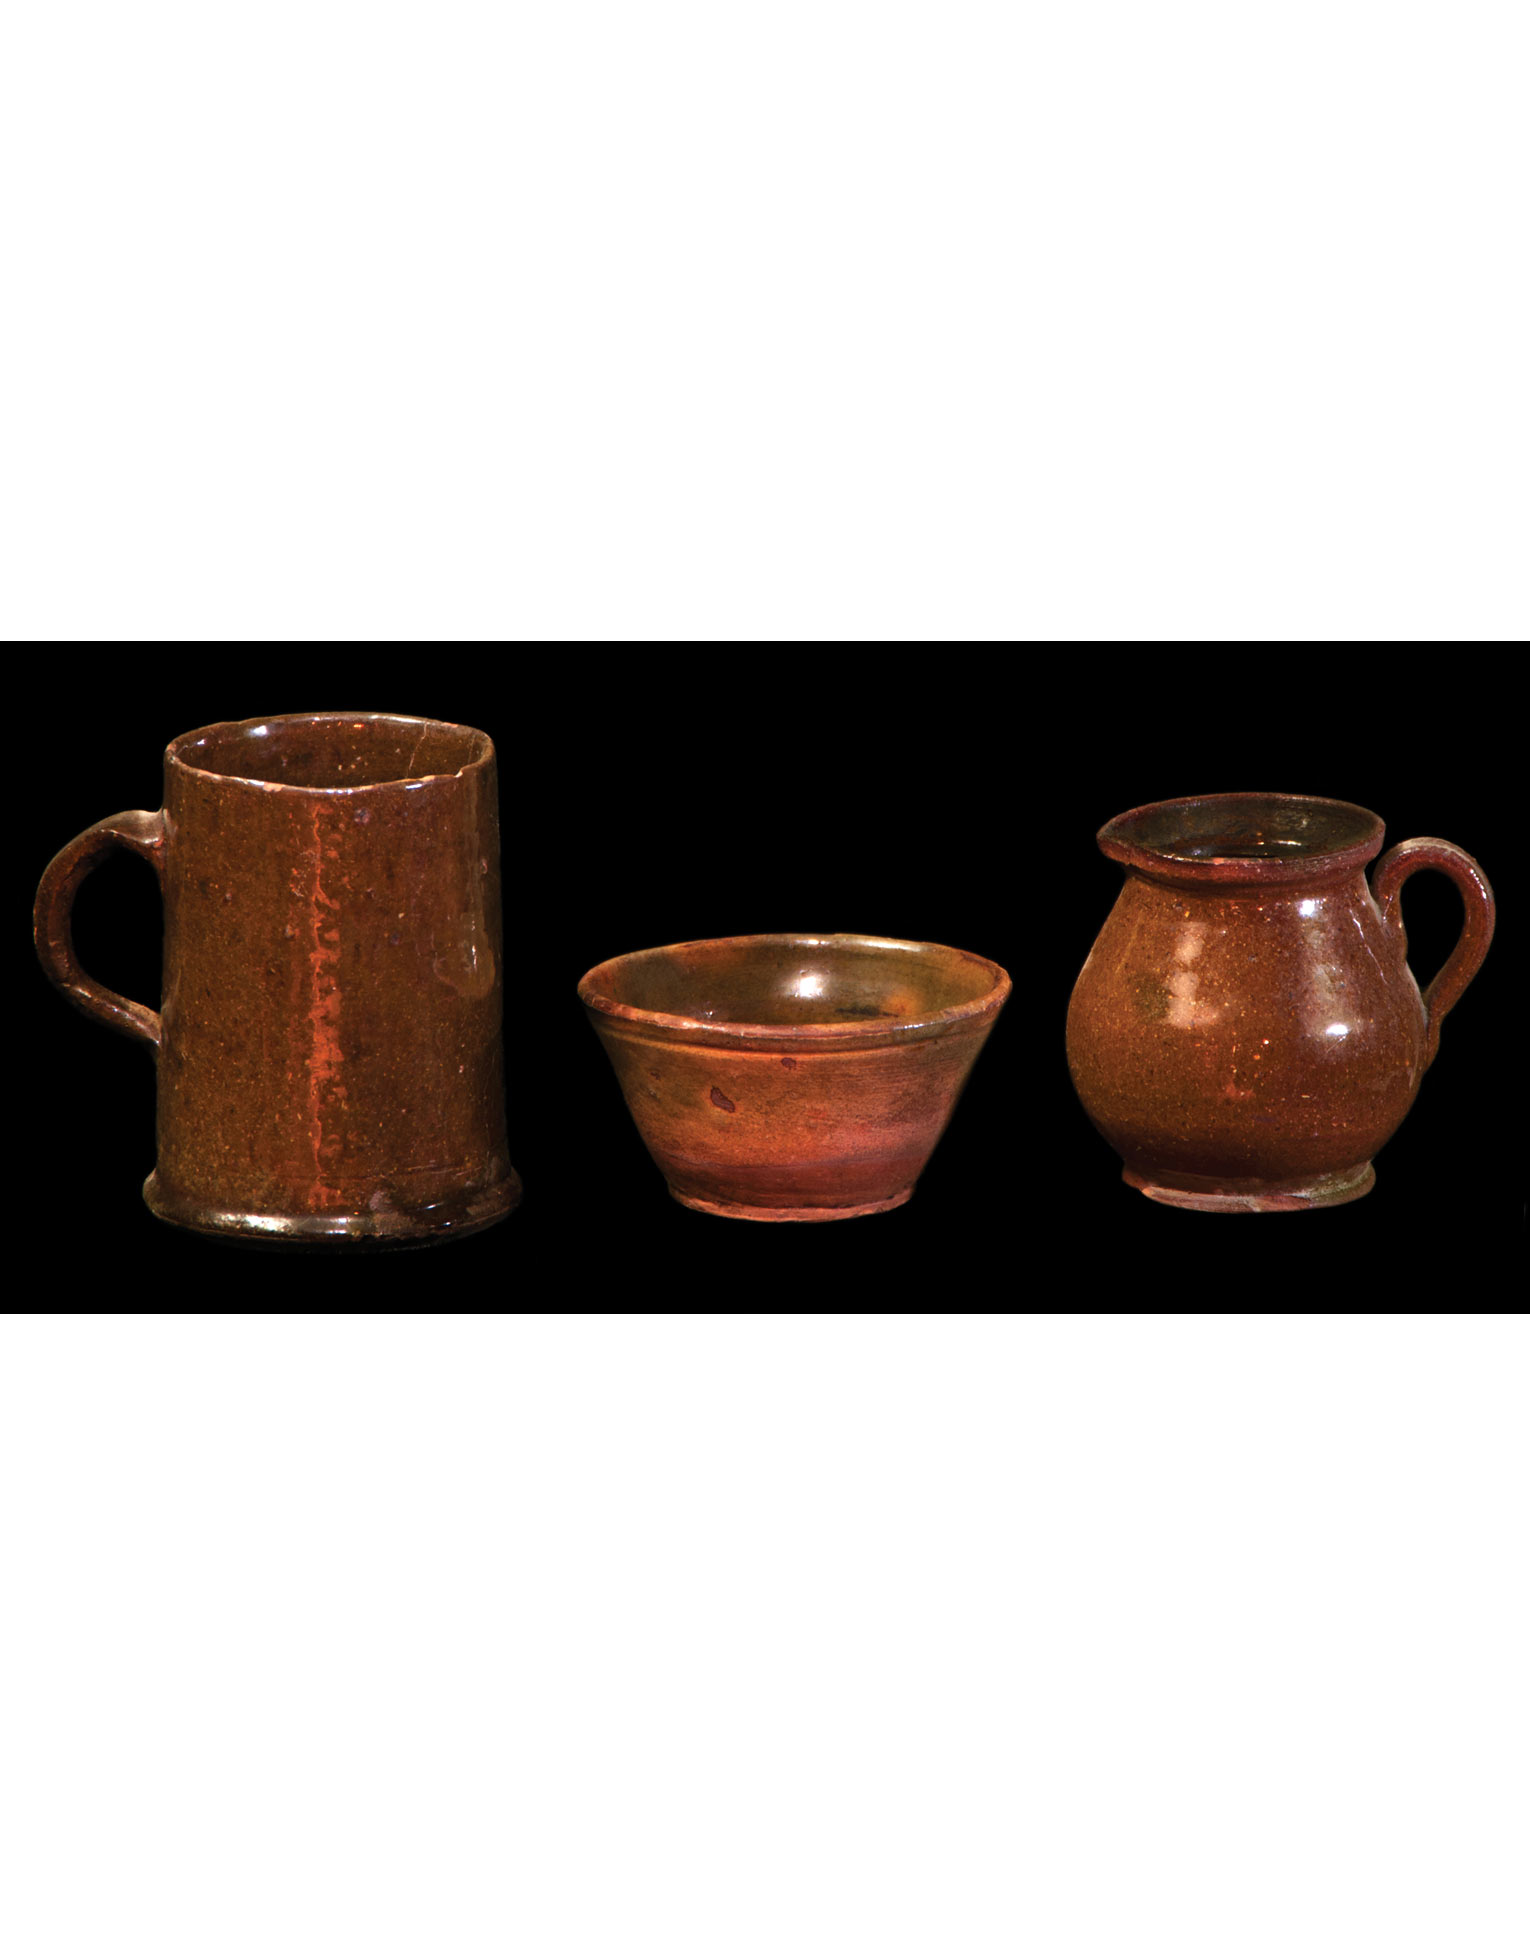 Lot 23G: Three Small New England Redware Pieces